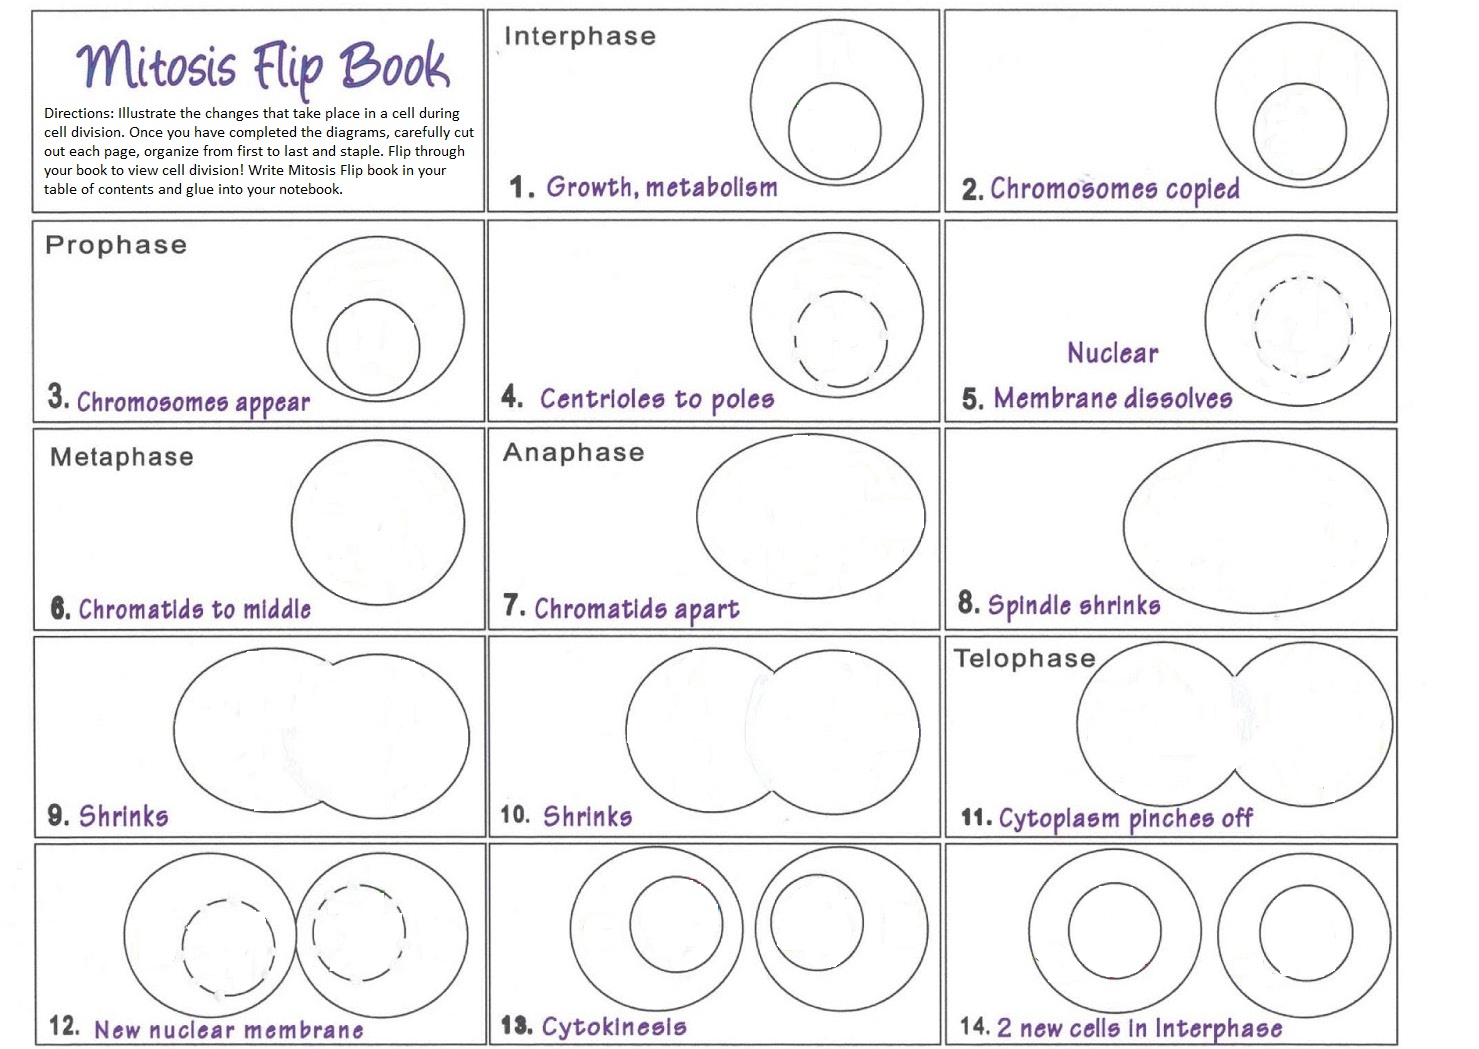 biology flip book for mitosis